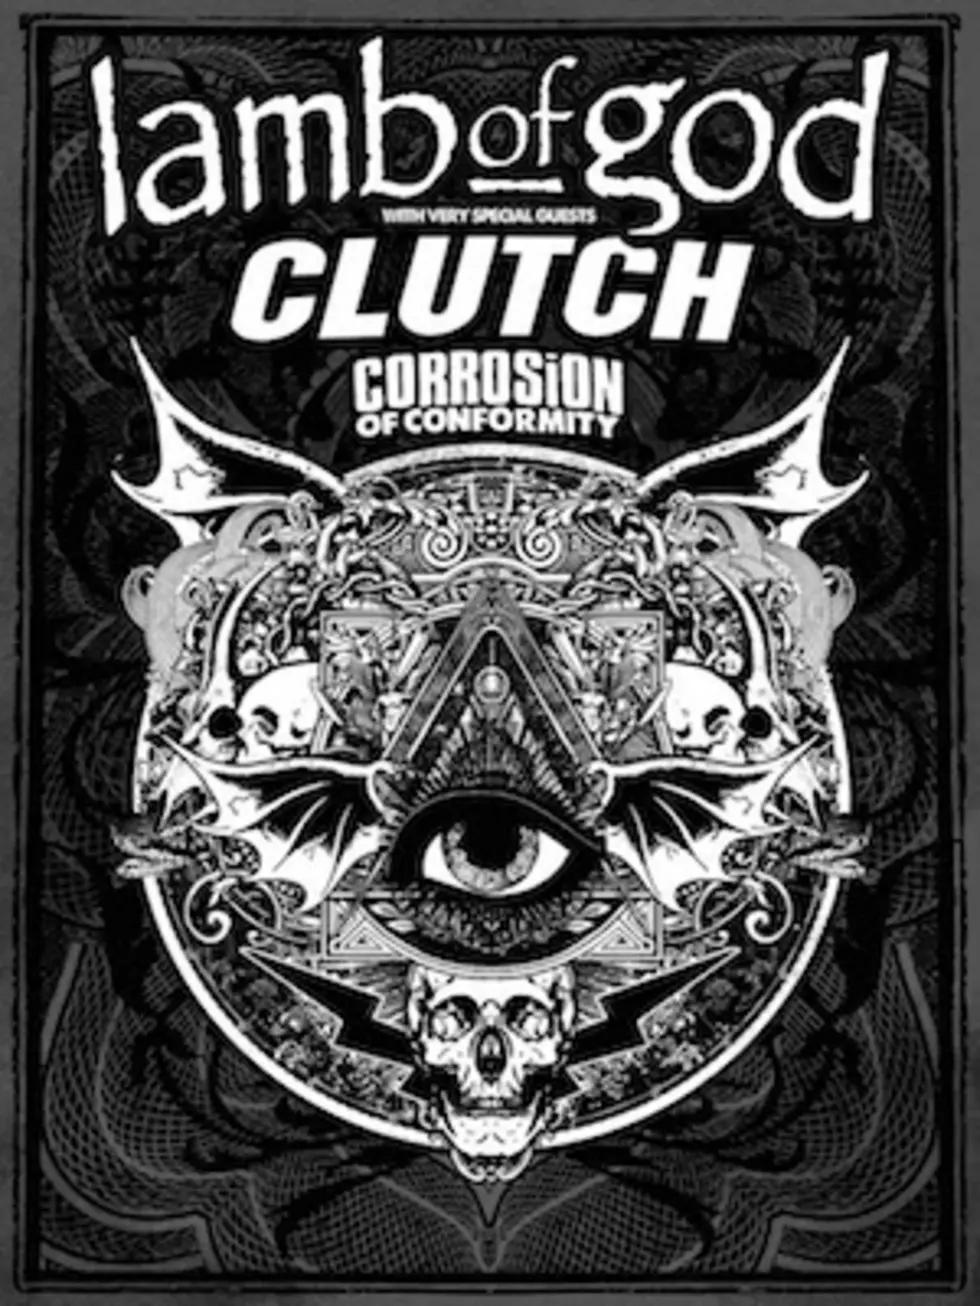 Lamb of God Announce 2016 North American Tour With Clutch + Corrosion of Conformity